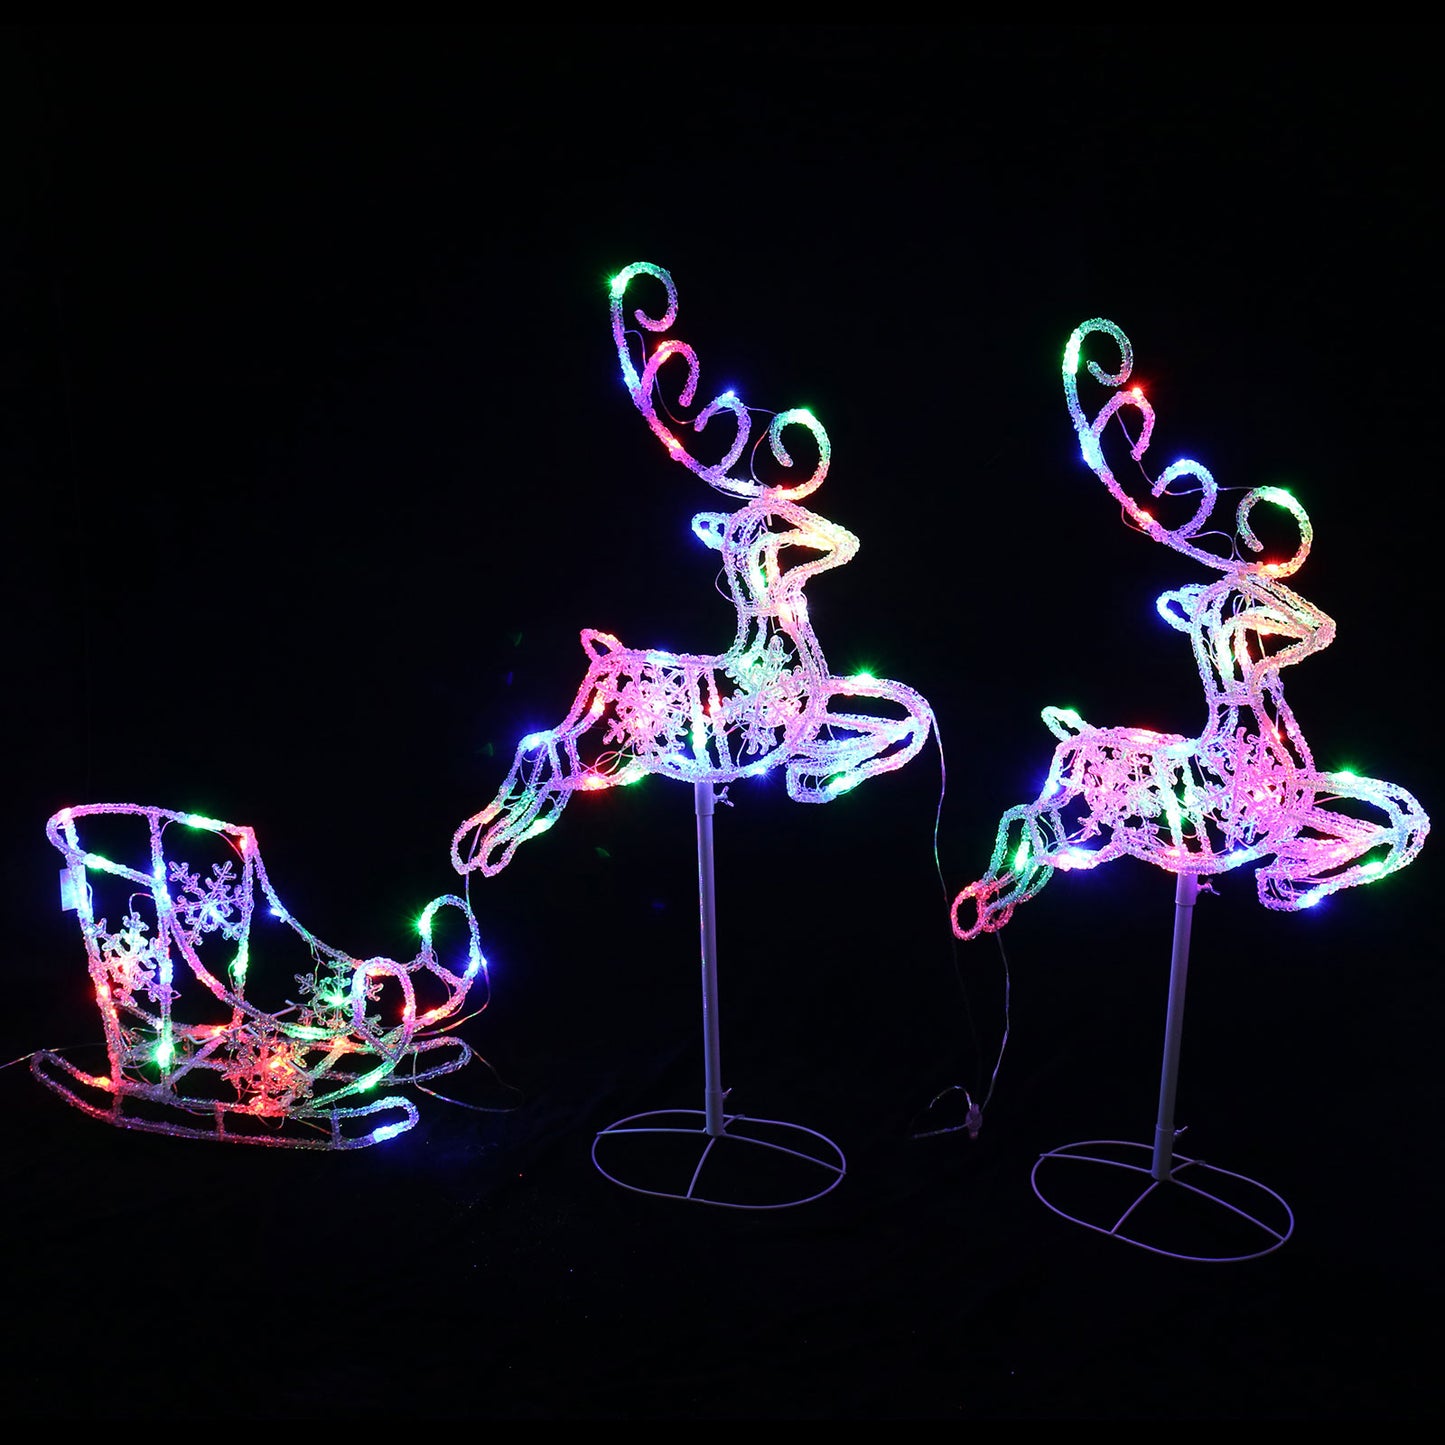 Christmas Lights 120 LEDs Sleigh Reindeers Multi Color Xmas Outdoor Garden 3M